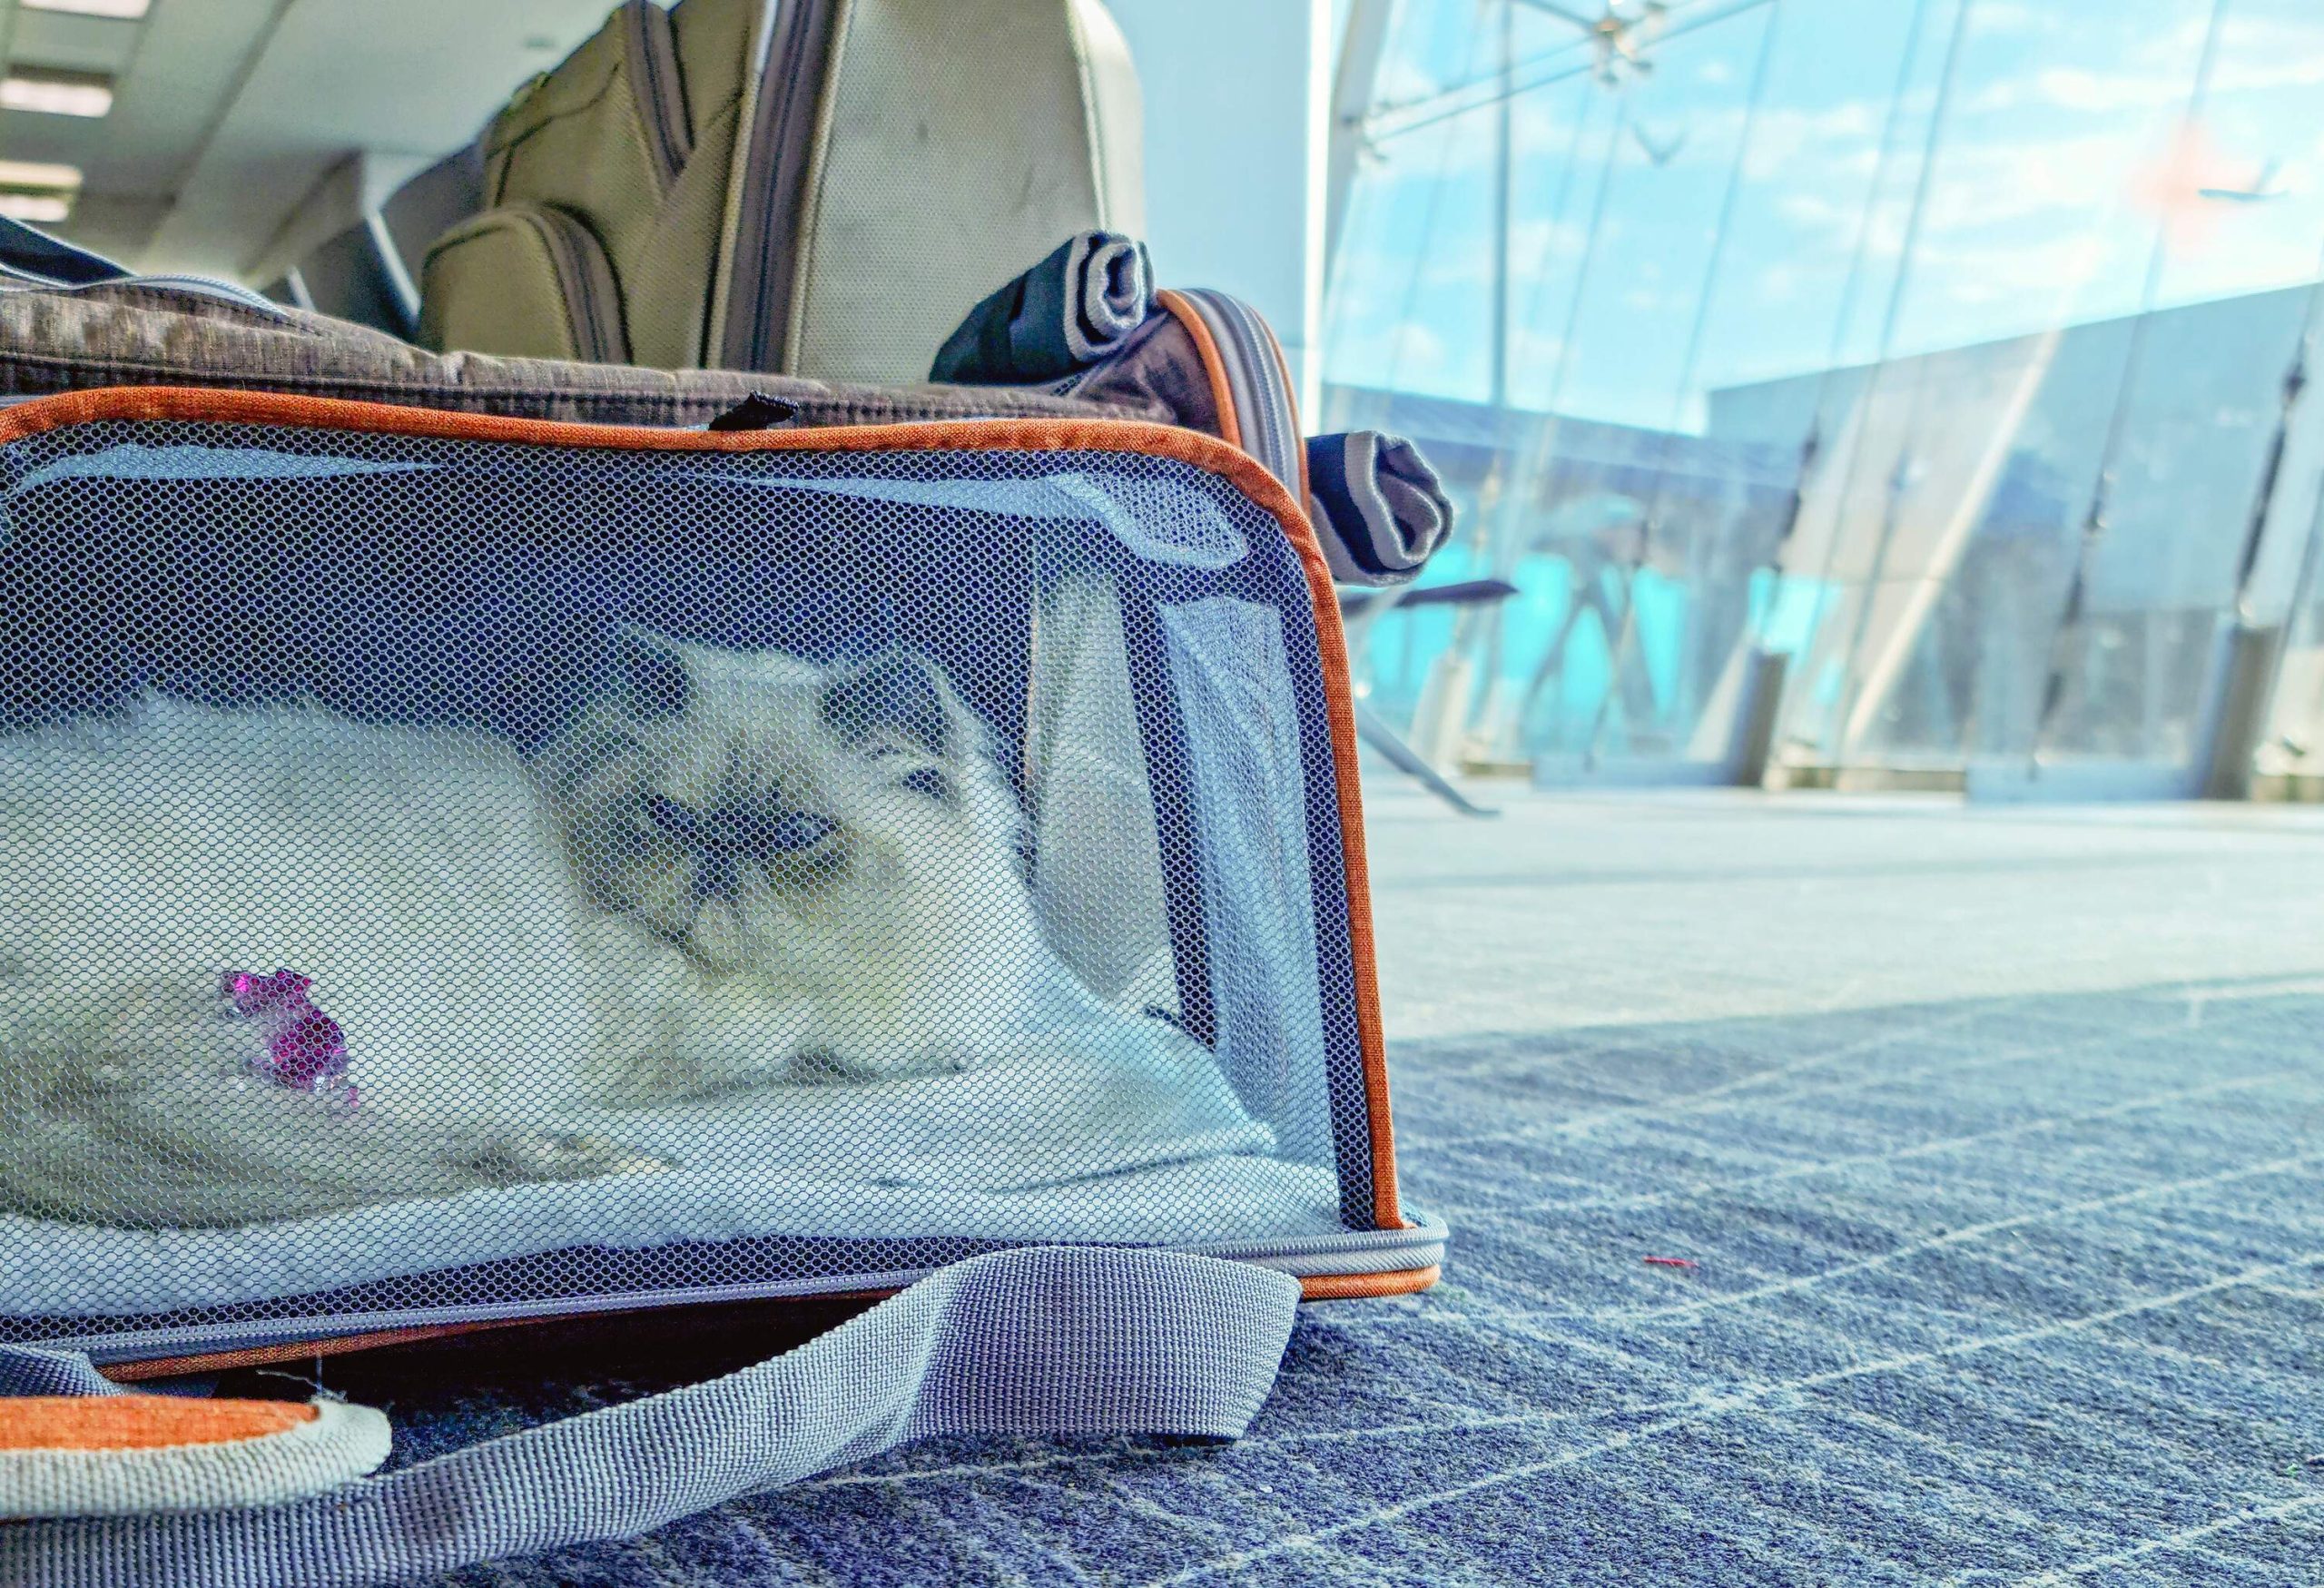 A fluffy cat rests inside a carrier beside a luggage.